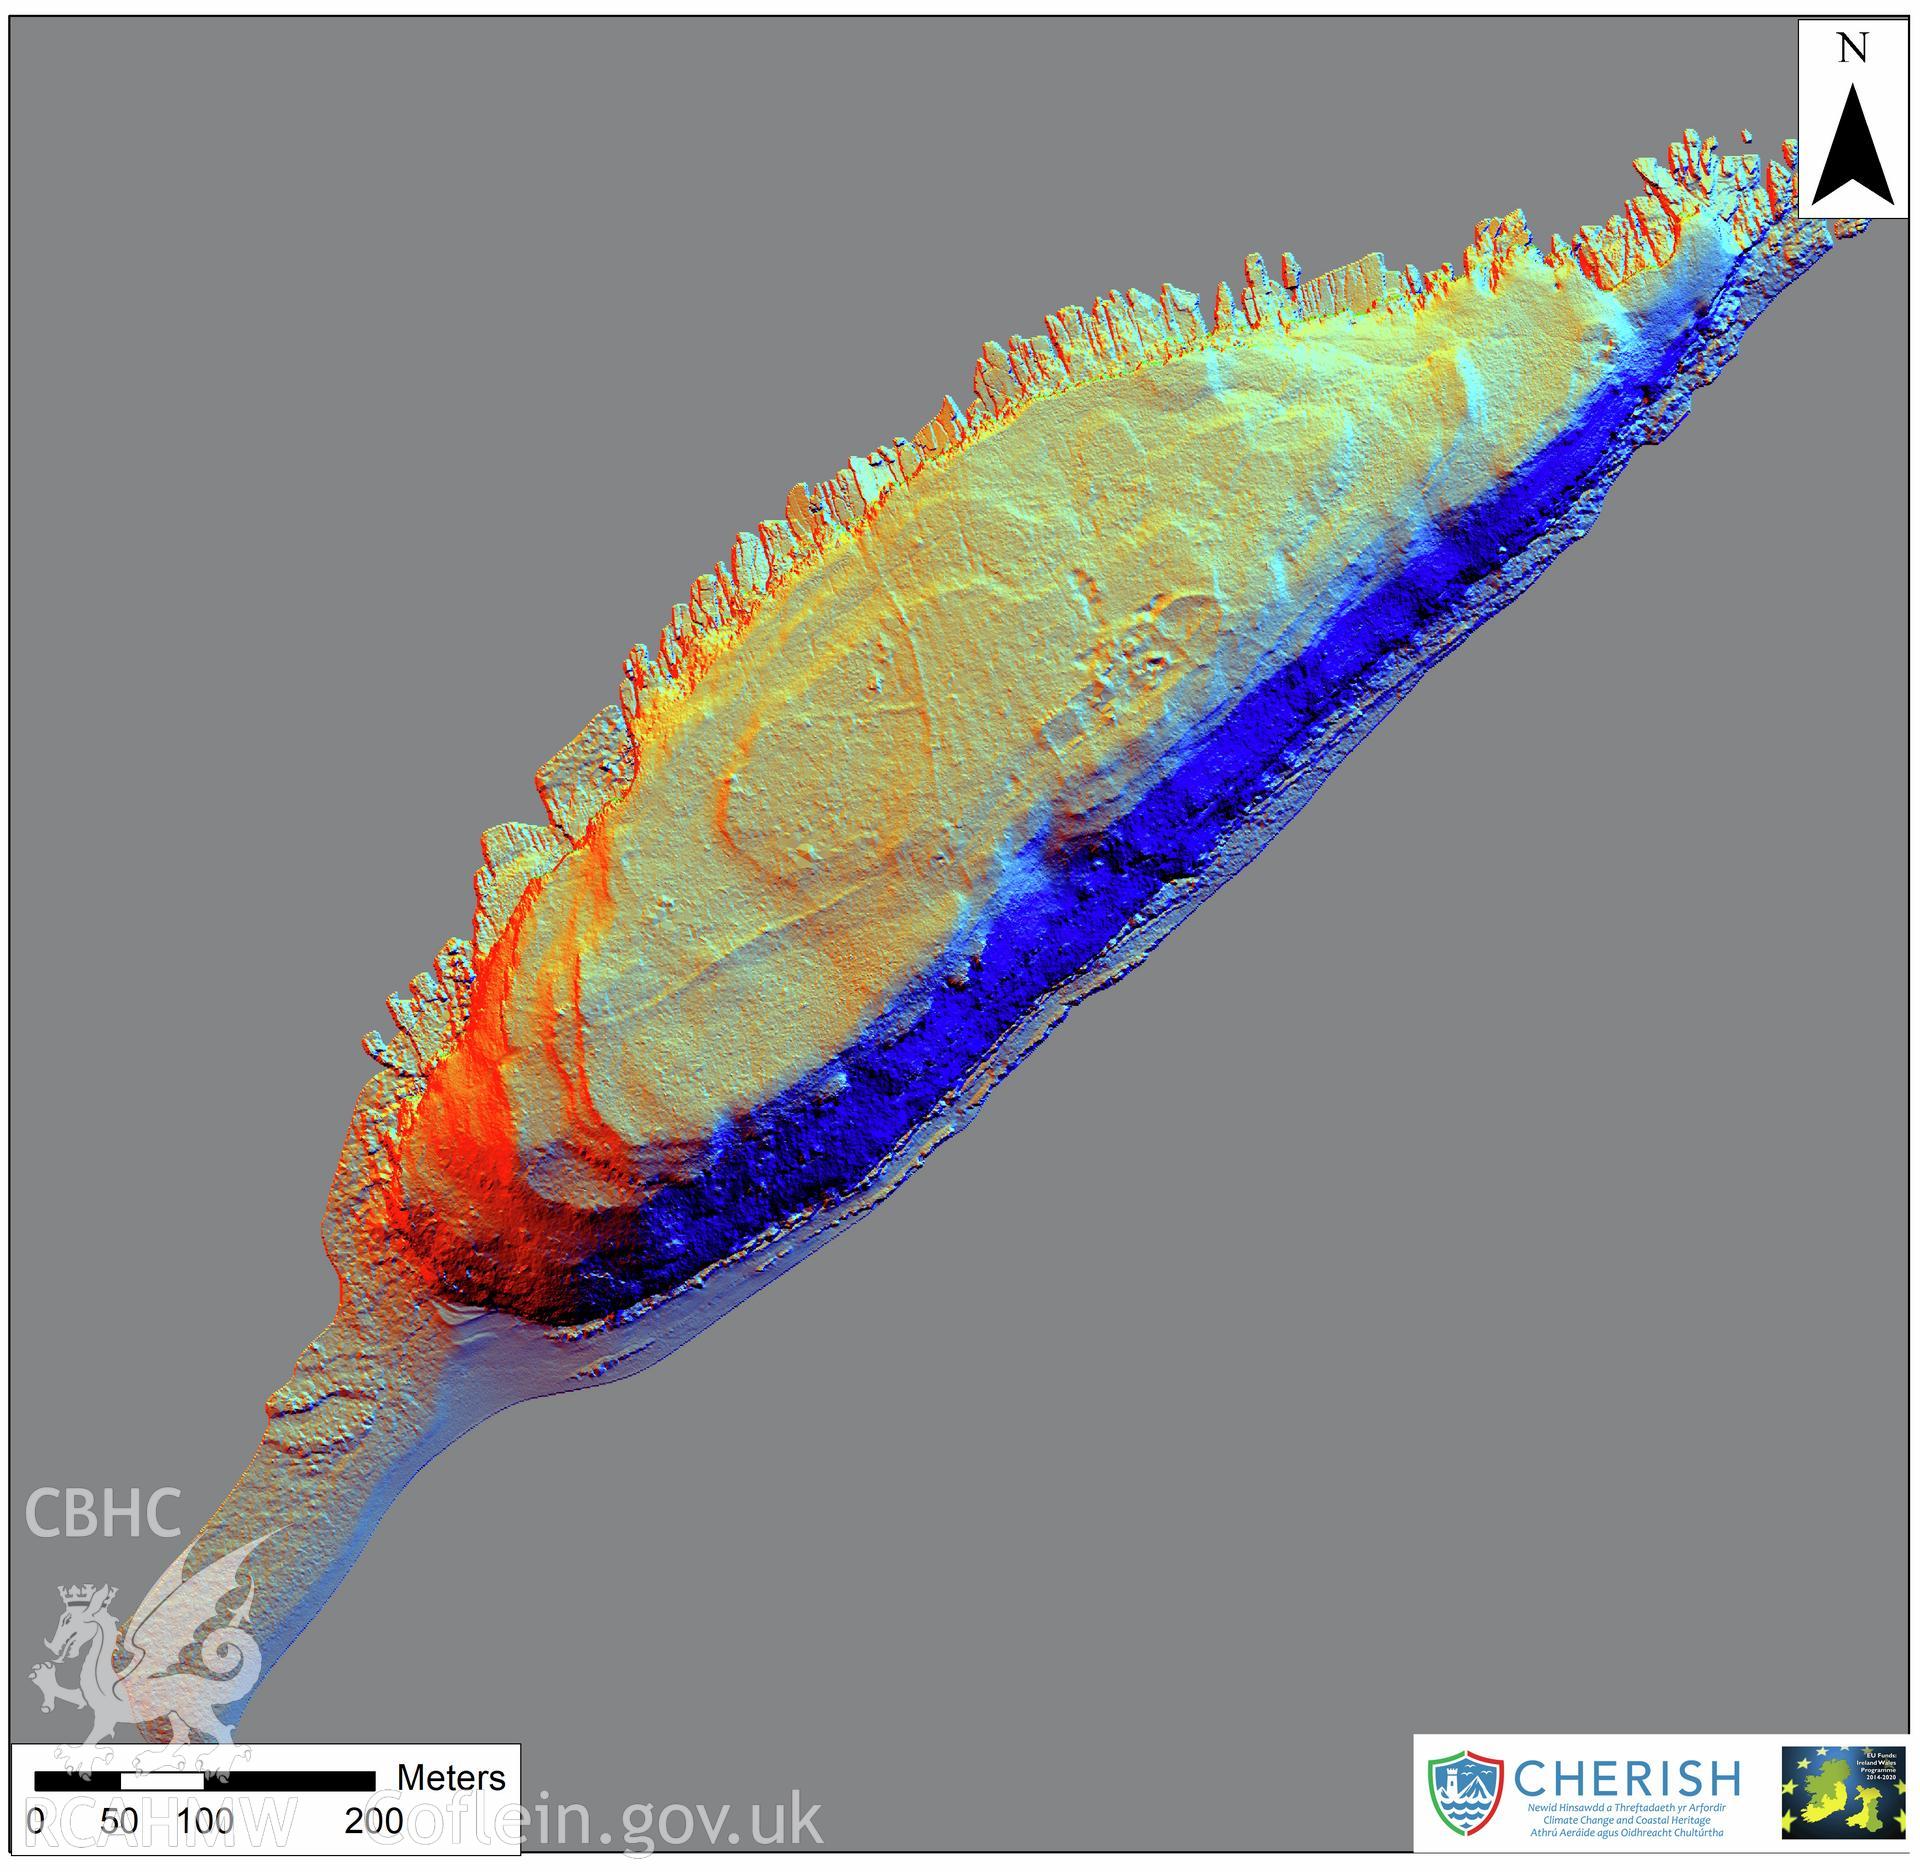 Ynys Seiriol (Puffin Island). Airborne laser scanning (LiDAR) commissioned by the CHERISH Project 2017-2021, flown by Bluesky International LTD at low tide on 24th February 2017. Digital Terrain Model (DTM) showing whole of the island with multi hill shading.